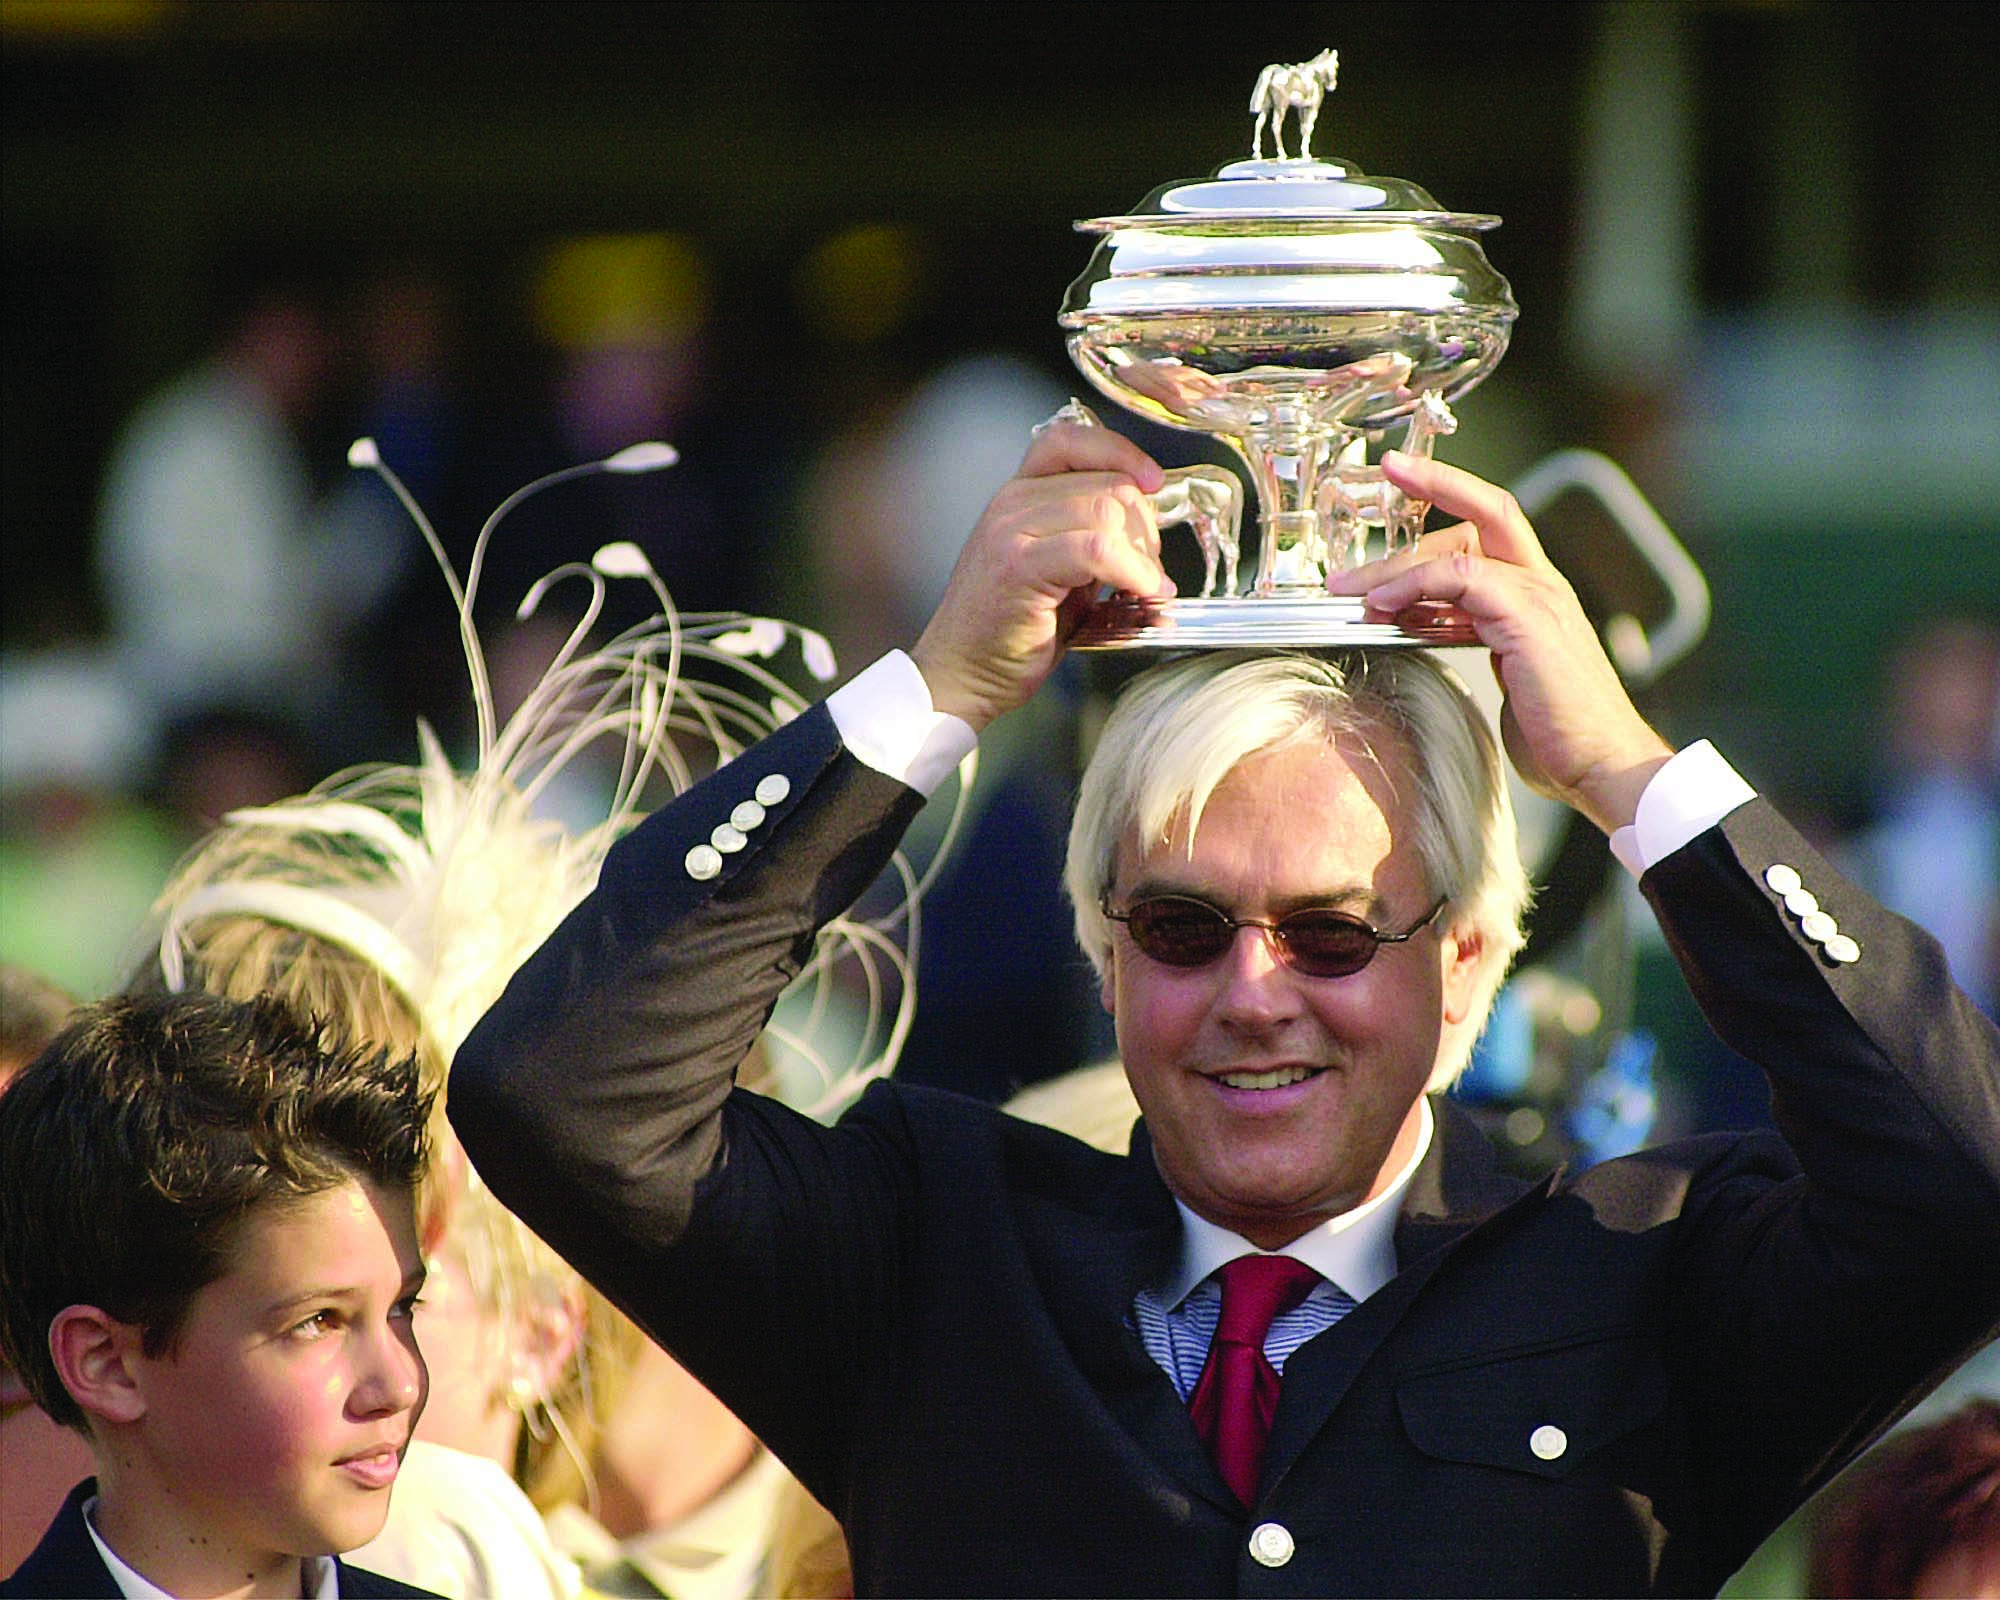 Bob Baffert puts the Belmont Stakes winning trainer trophy on his head after Point Given's 12 1/4 length victory in the 133rd running of The Belmont Stakes at Belmont Park (Garry Jones)